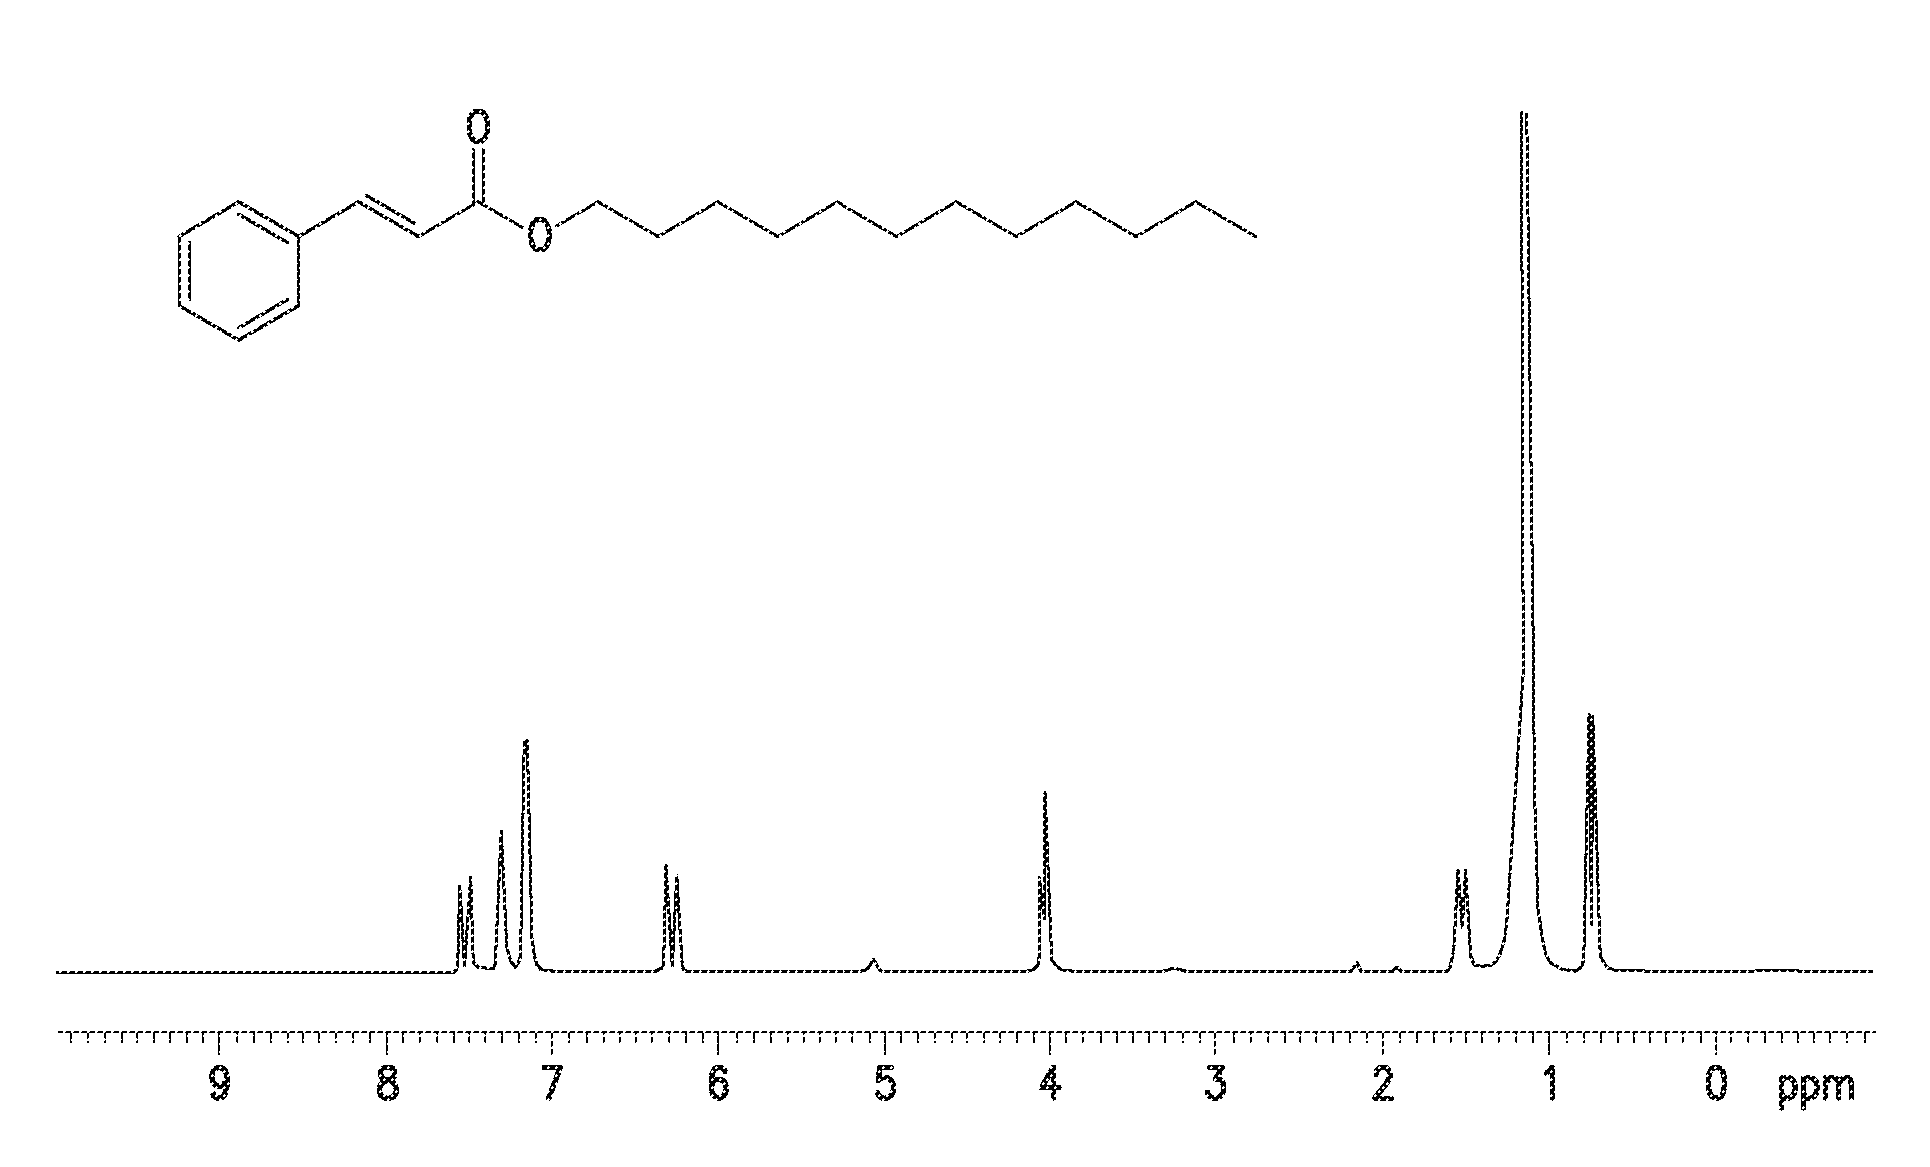 Single step green process for the preparation of substituted cinnamic esters with trans-selectivity